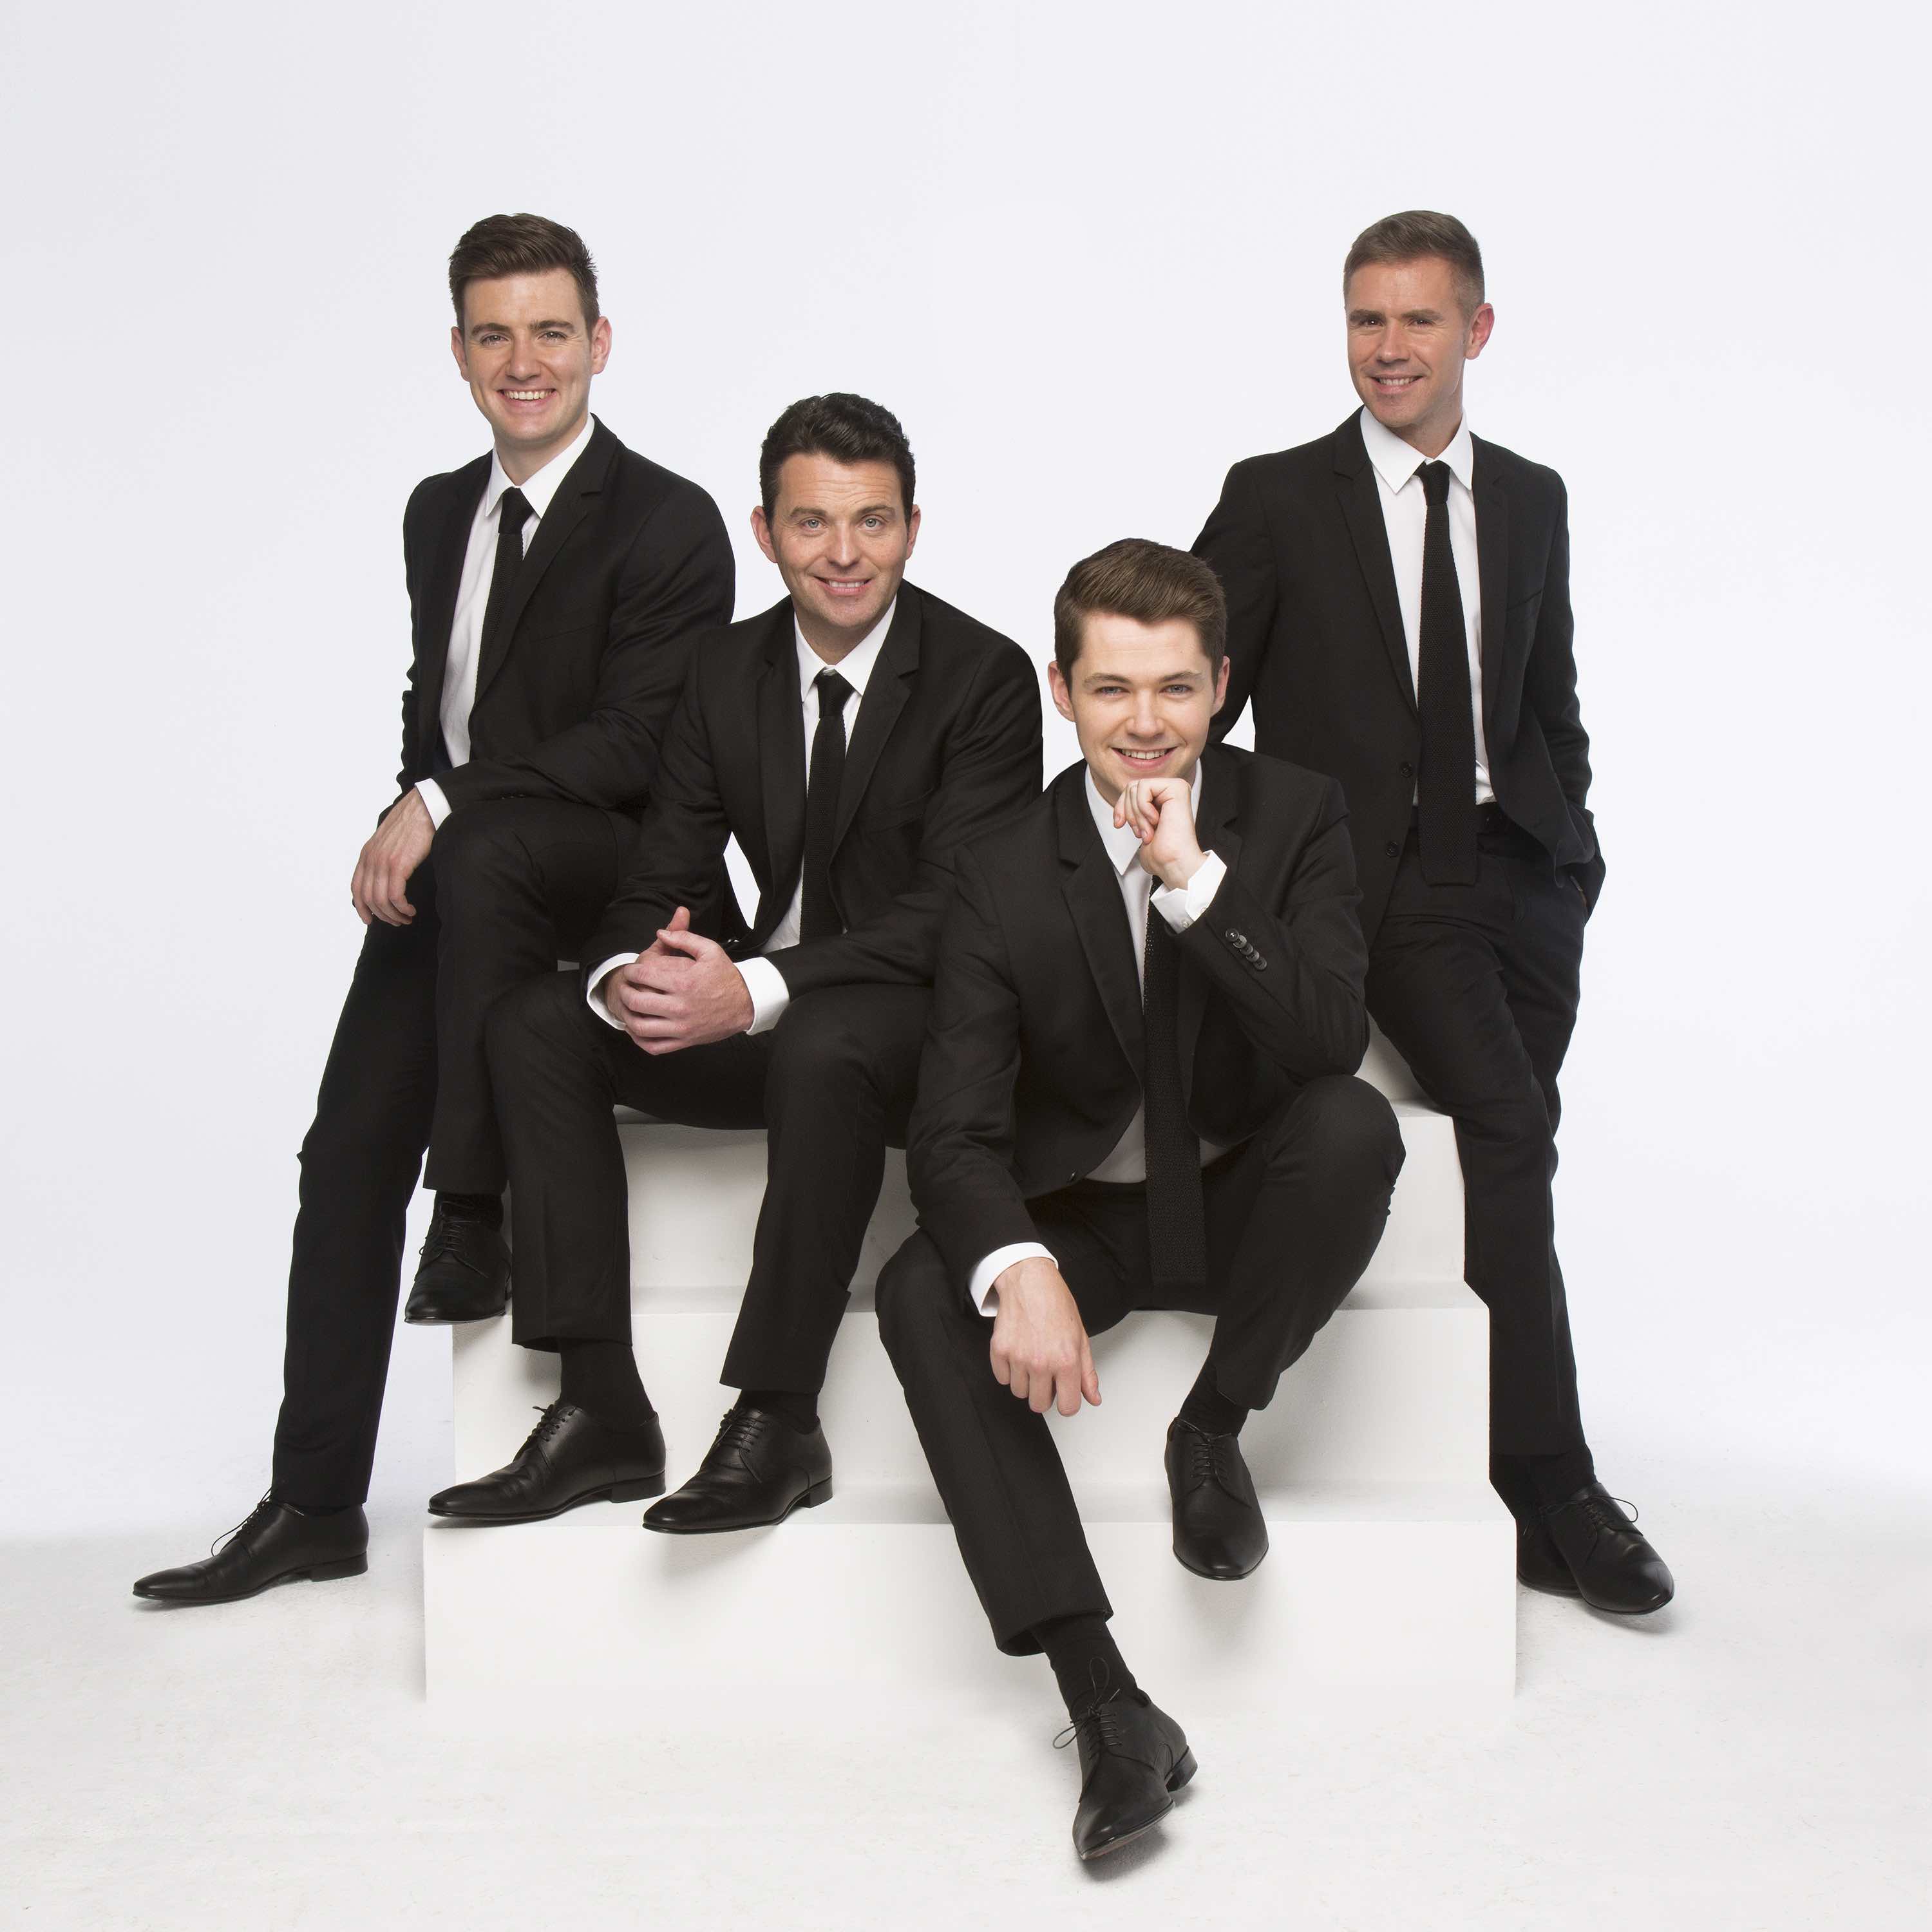 Celtic Thunder Feb 2, 2021 Tickets 15 USD (150 StageIt Notes